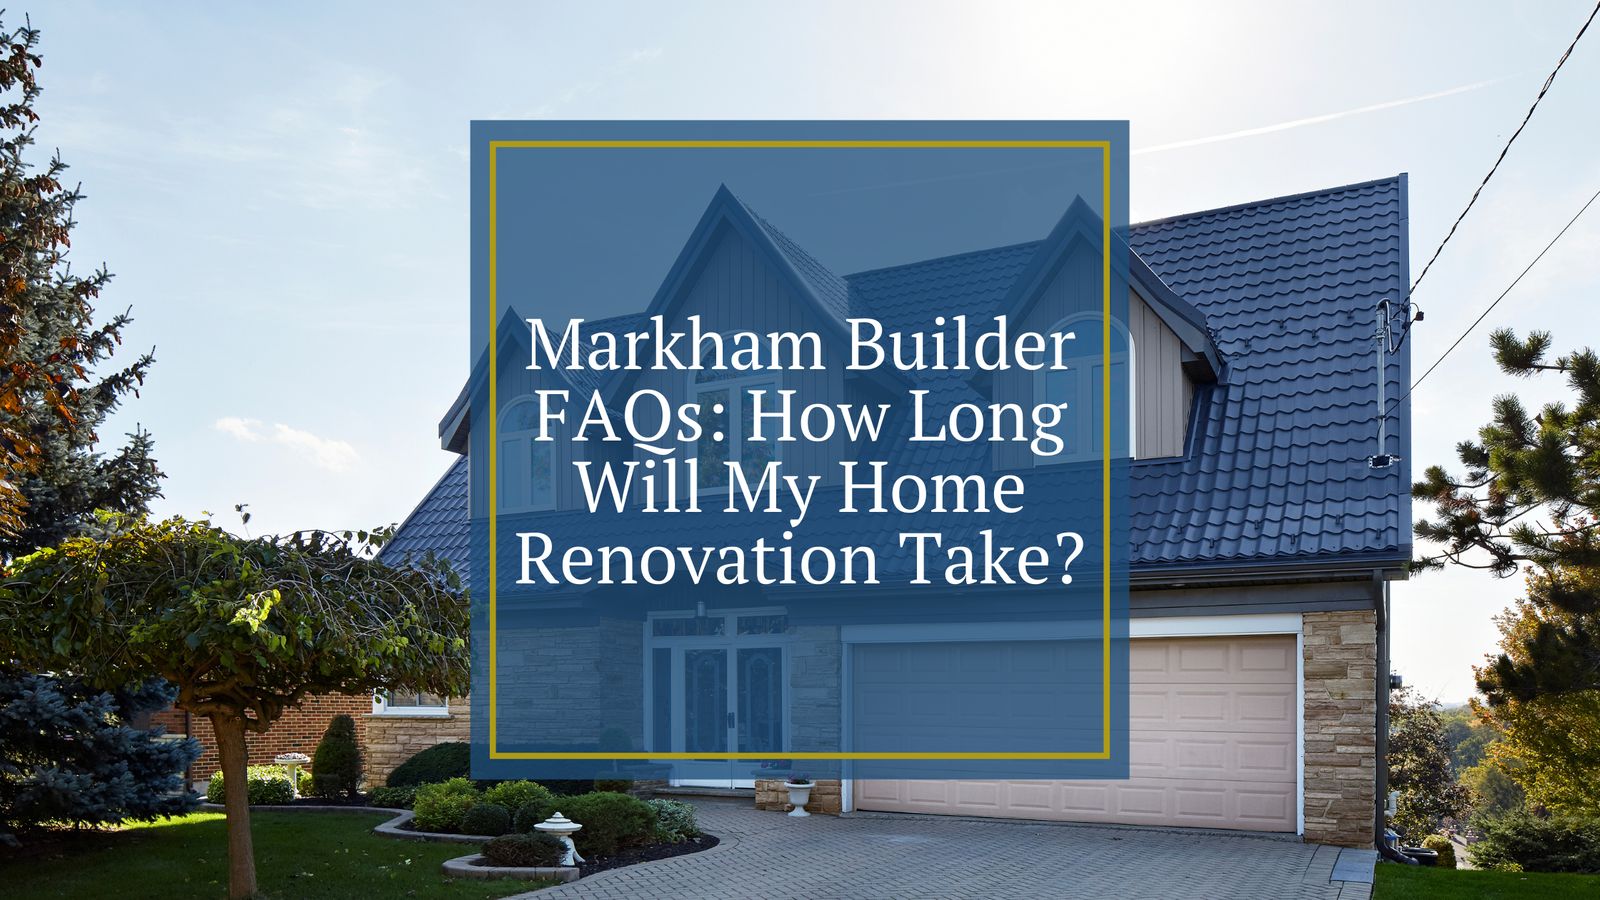 Markham Builder FAQs: How Long Will My Home Renovation Take?